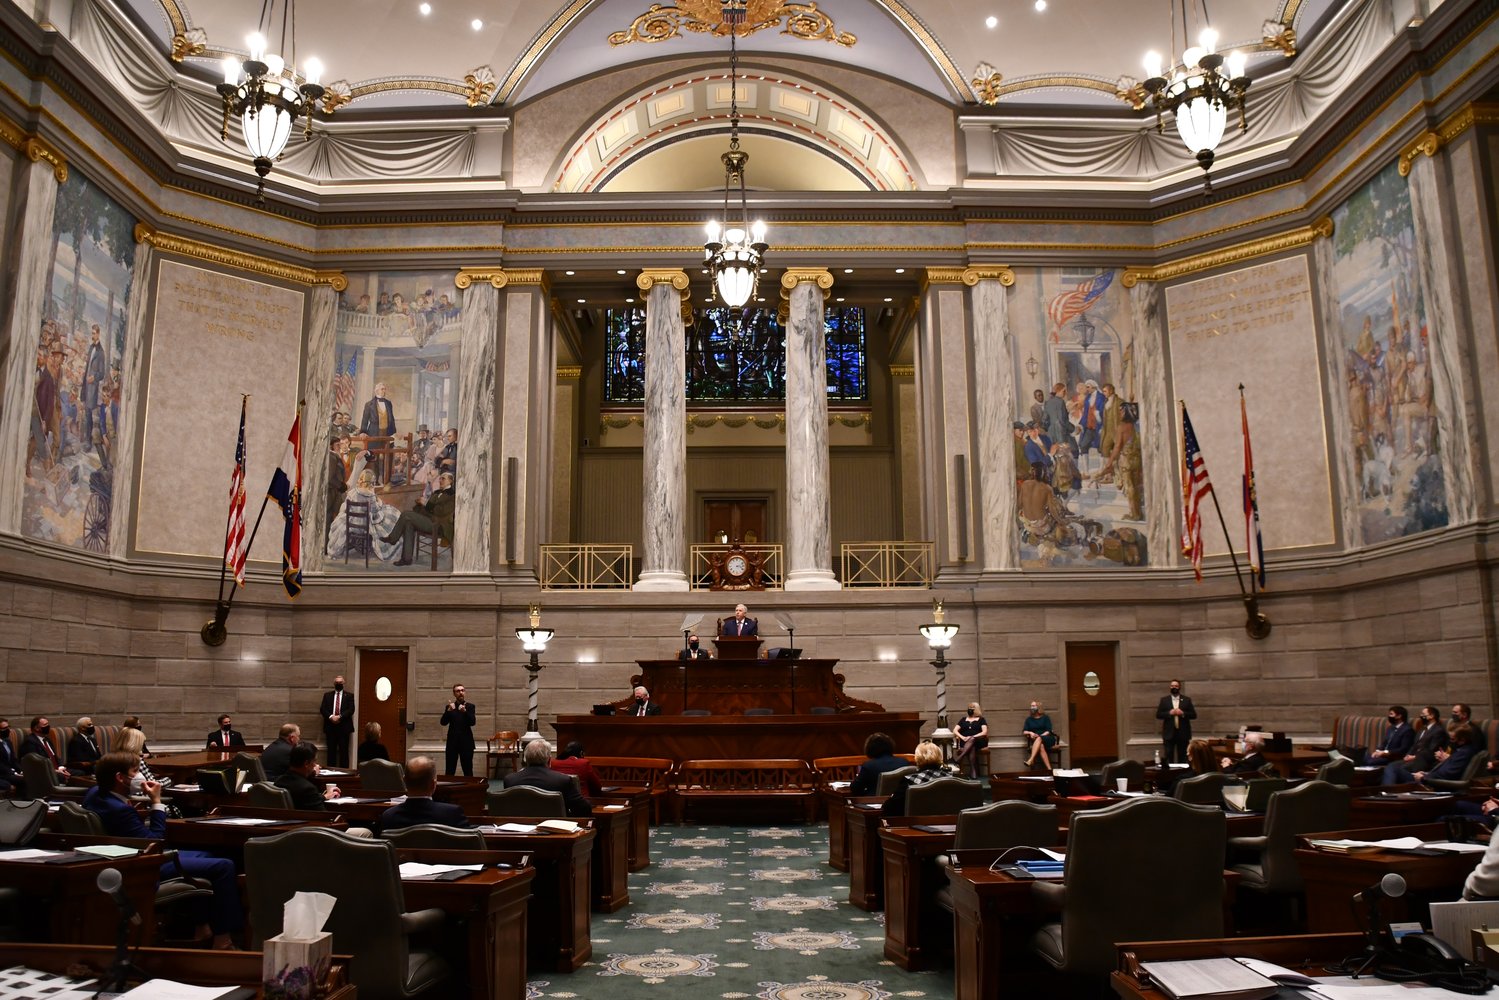 Parson's speech is delivered in the socially distanced Senate chambers.